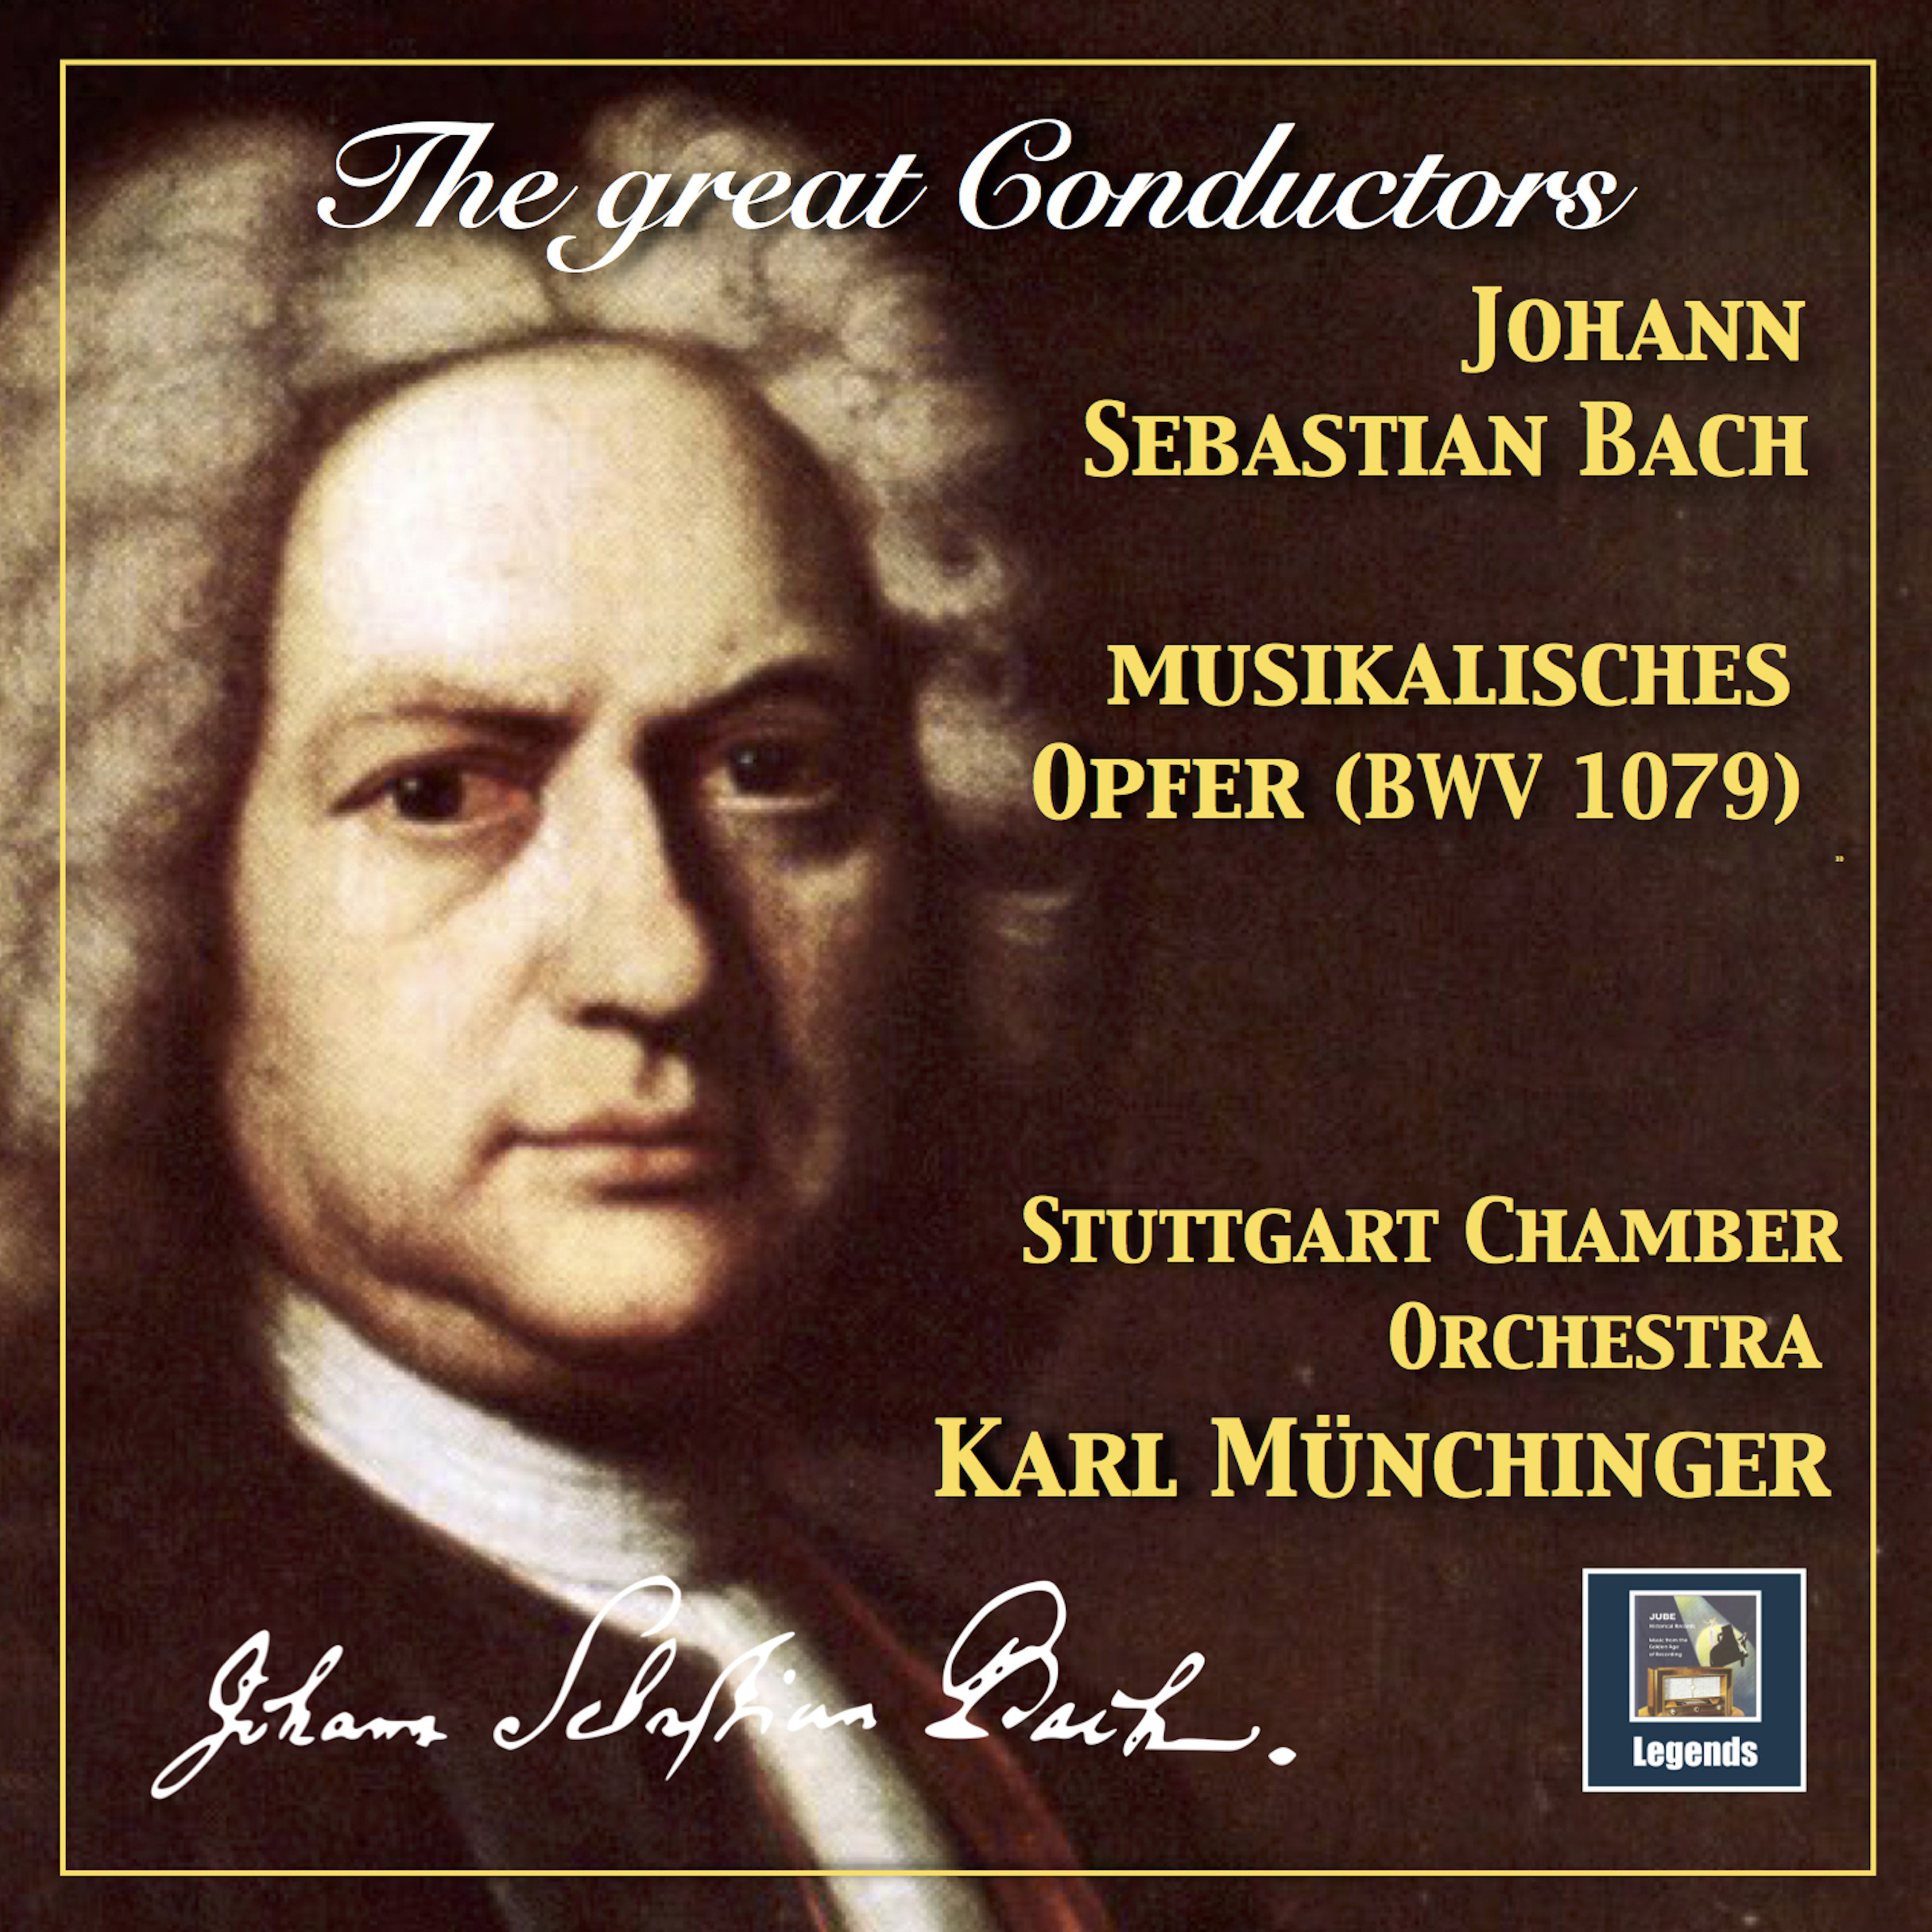 Musikalisches Opfer, BWV 1079 (Arr. K. Münchinger for Chamber Orchestra): Ricercare à 3